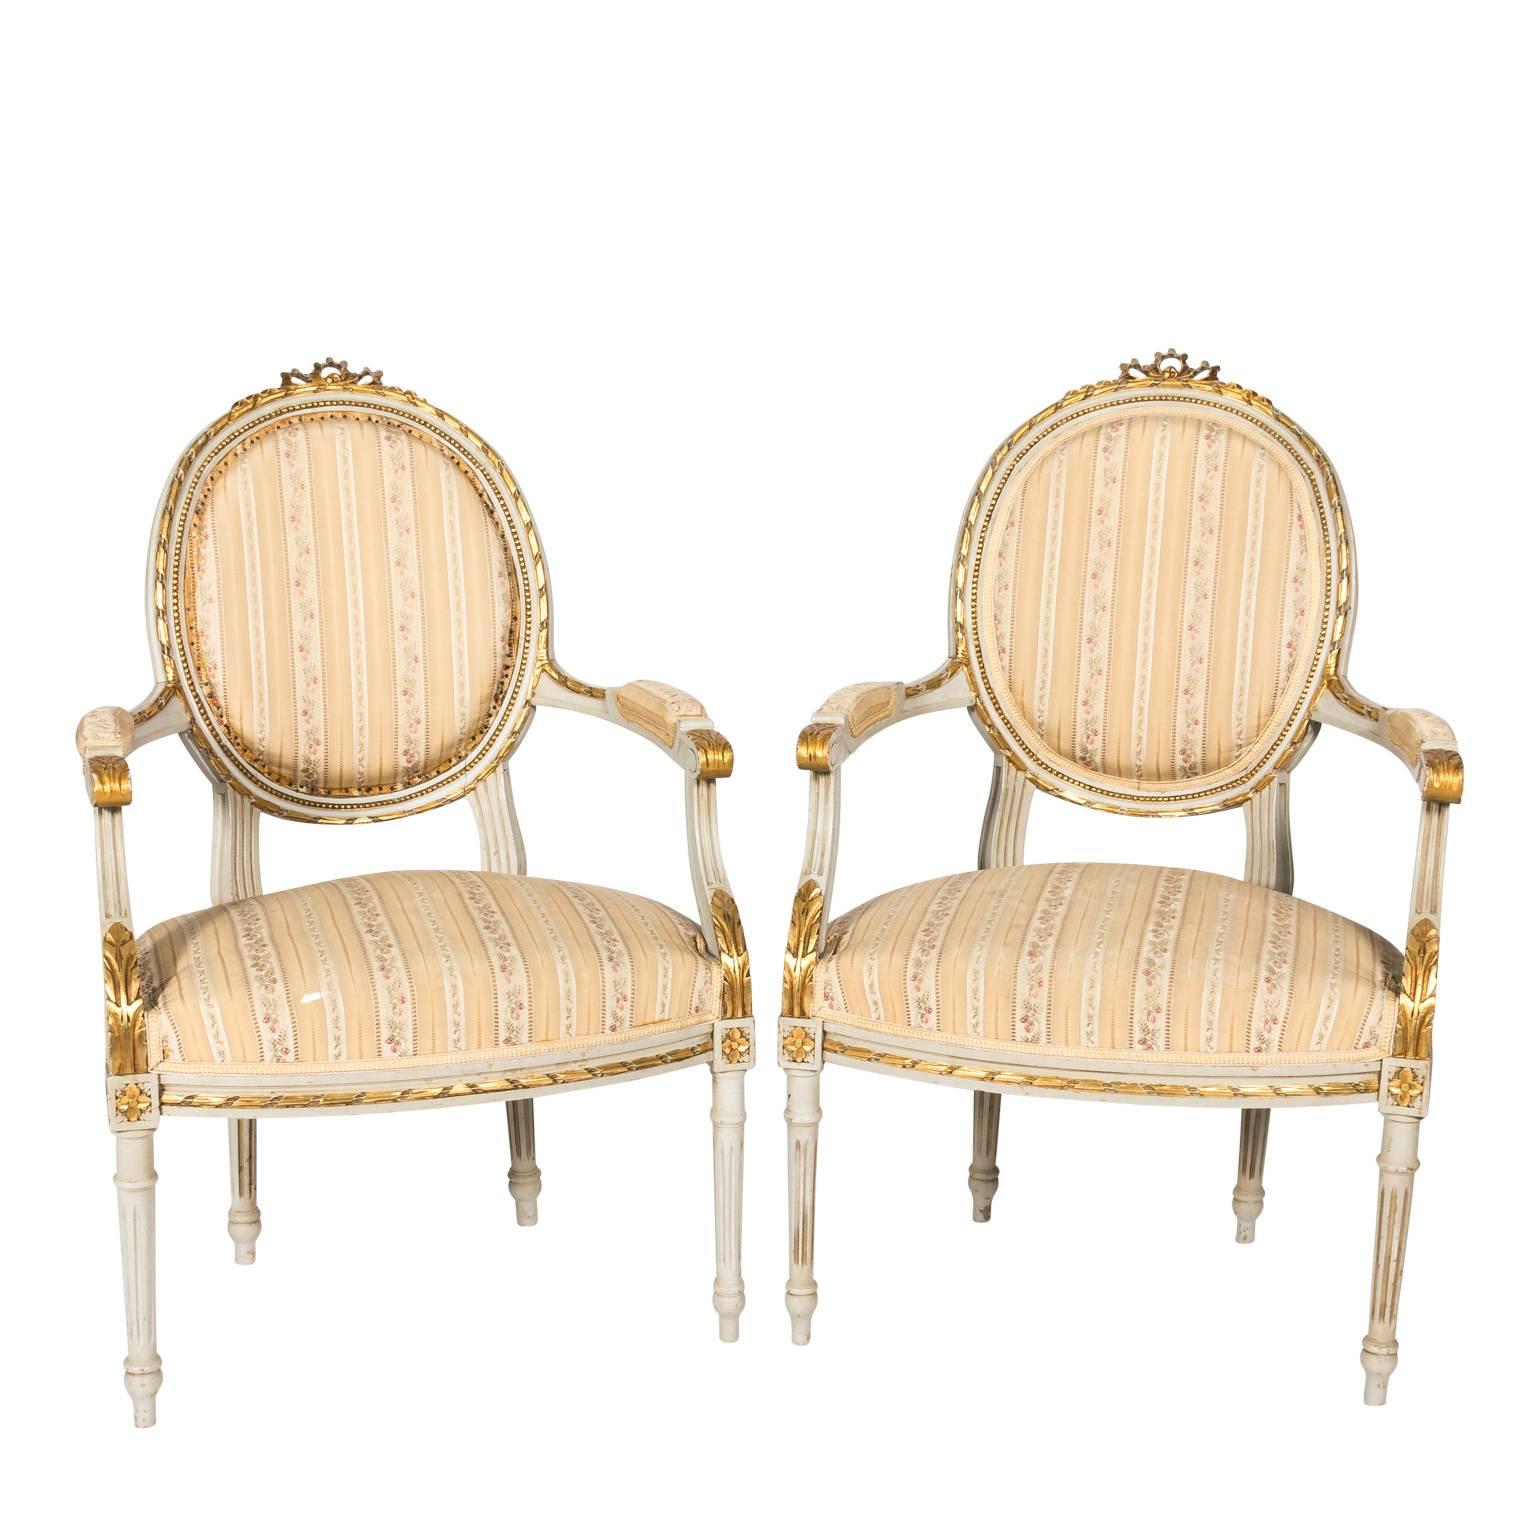 Pair of White Painted Louis XVI Style Armchairs